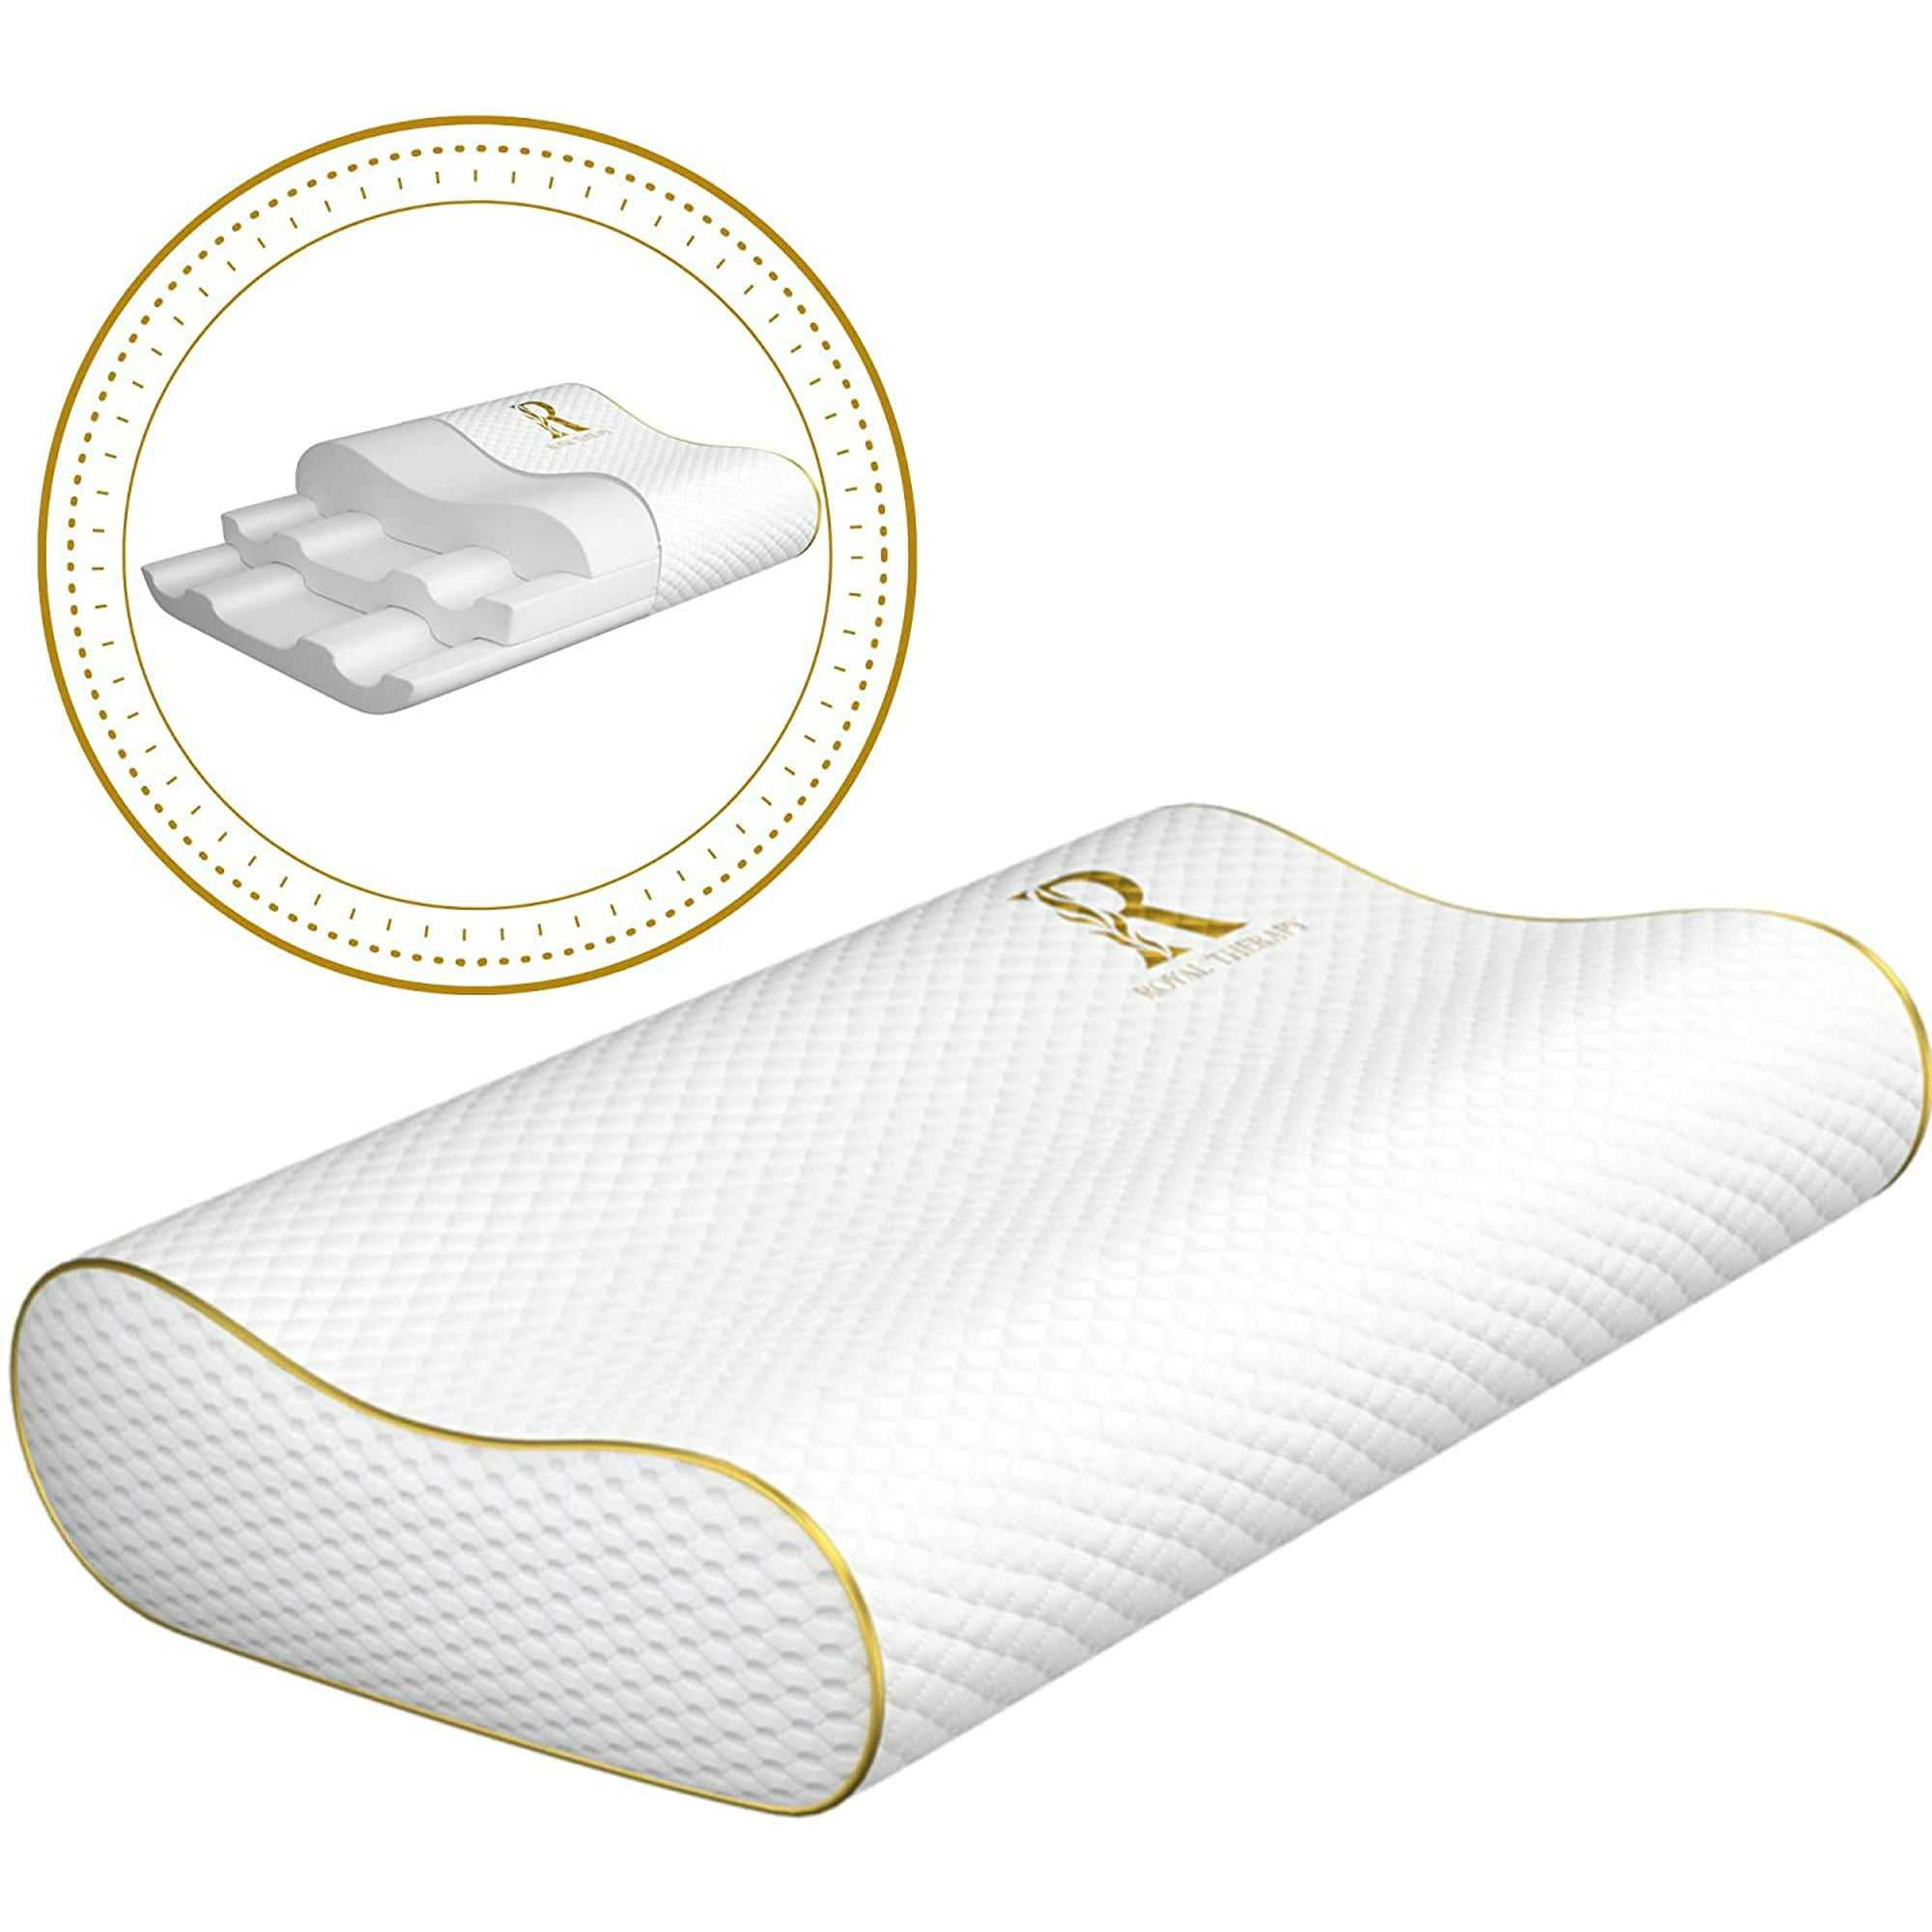 Royal Therapy Queen Memory Foam Pillow